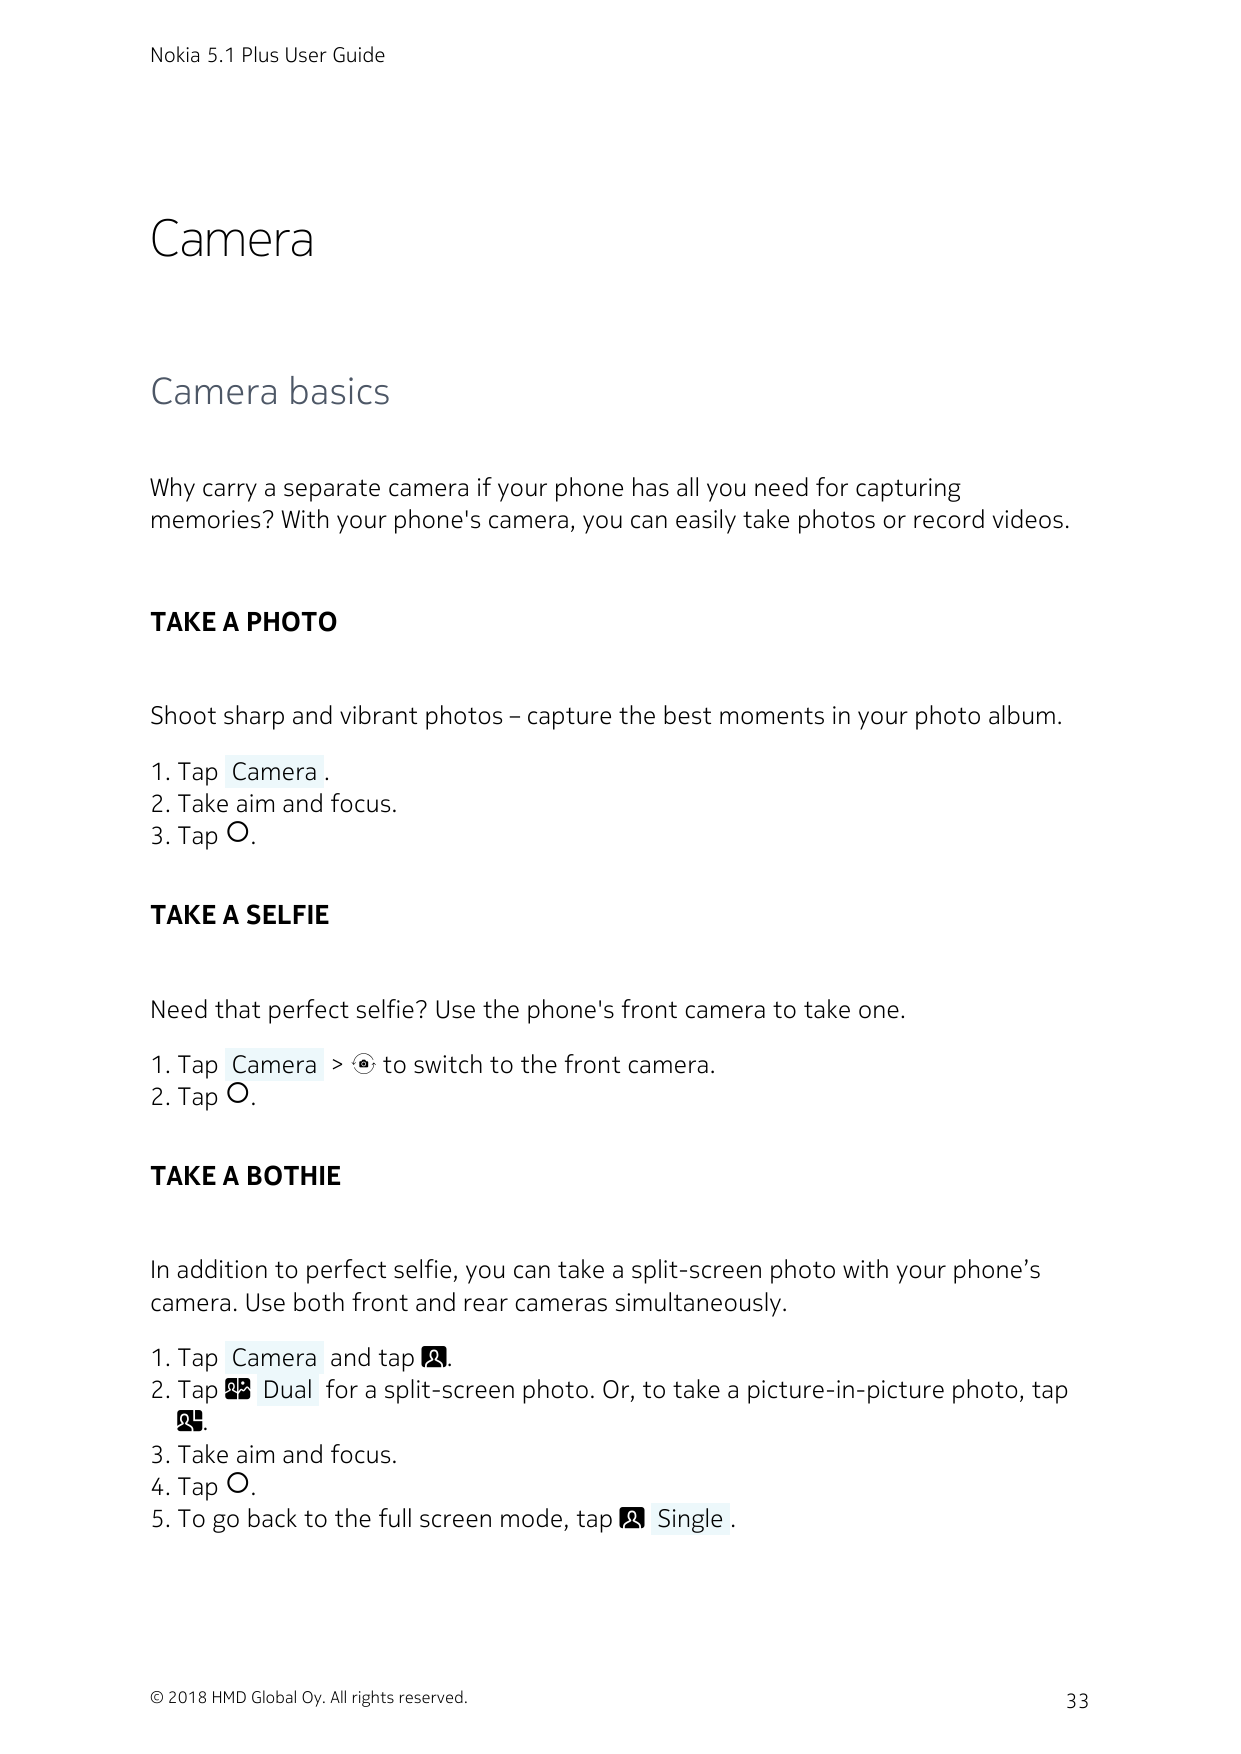 Nokia 5.1 Plus User GuideCameraCamera basicsWhy carry a separate camera if your phone has all you need for capturingmemories? Wi